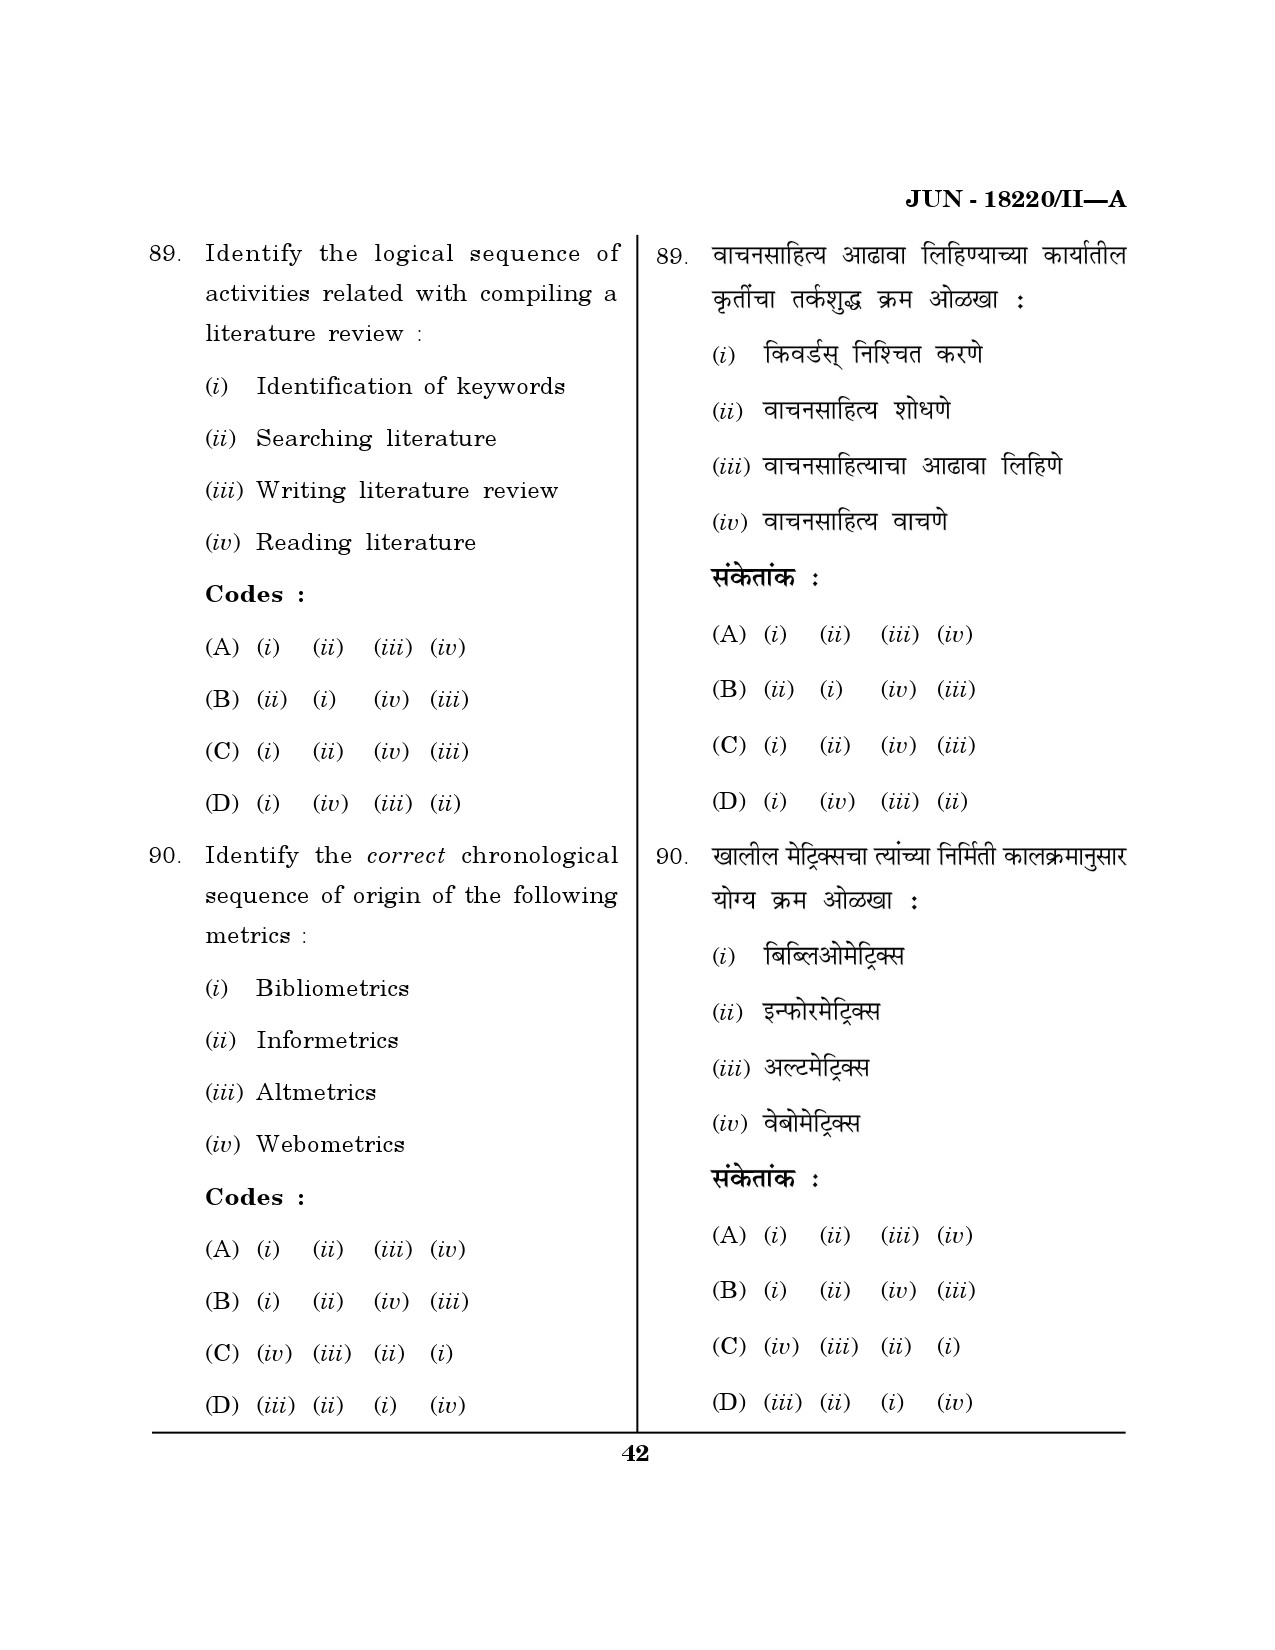 Maharashtra SET Library Information Science Question Paper II June 2020 41